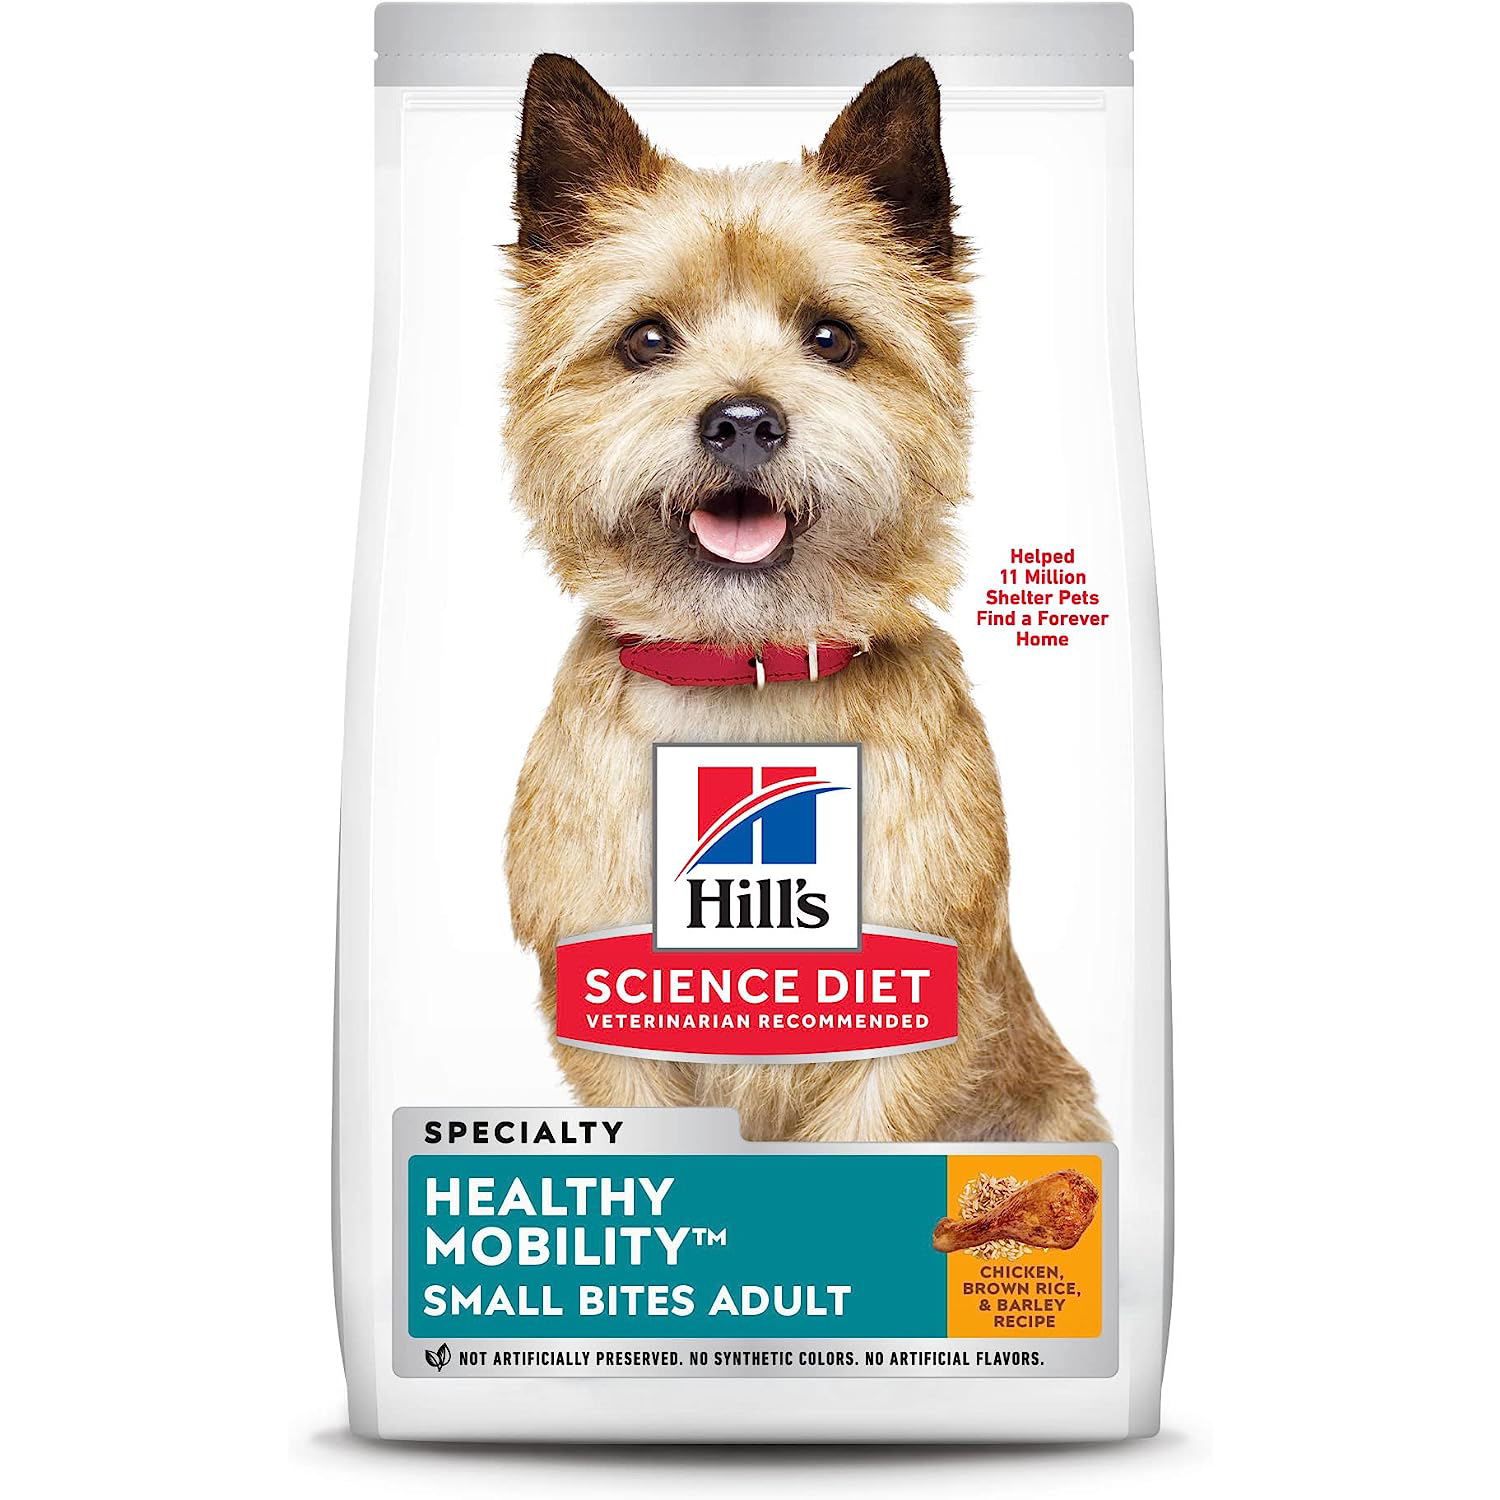 Hill's Science Diet Adult Healthy Mobility Small Bites Chicken Meal, Brown Rice & Barley Recipe Dry Dog Food 